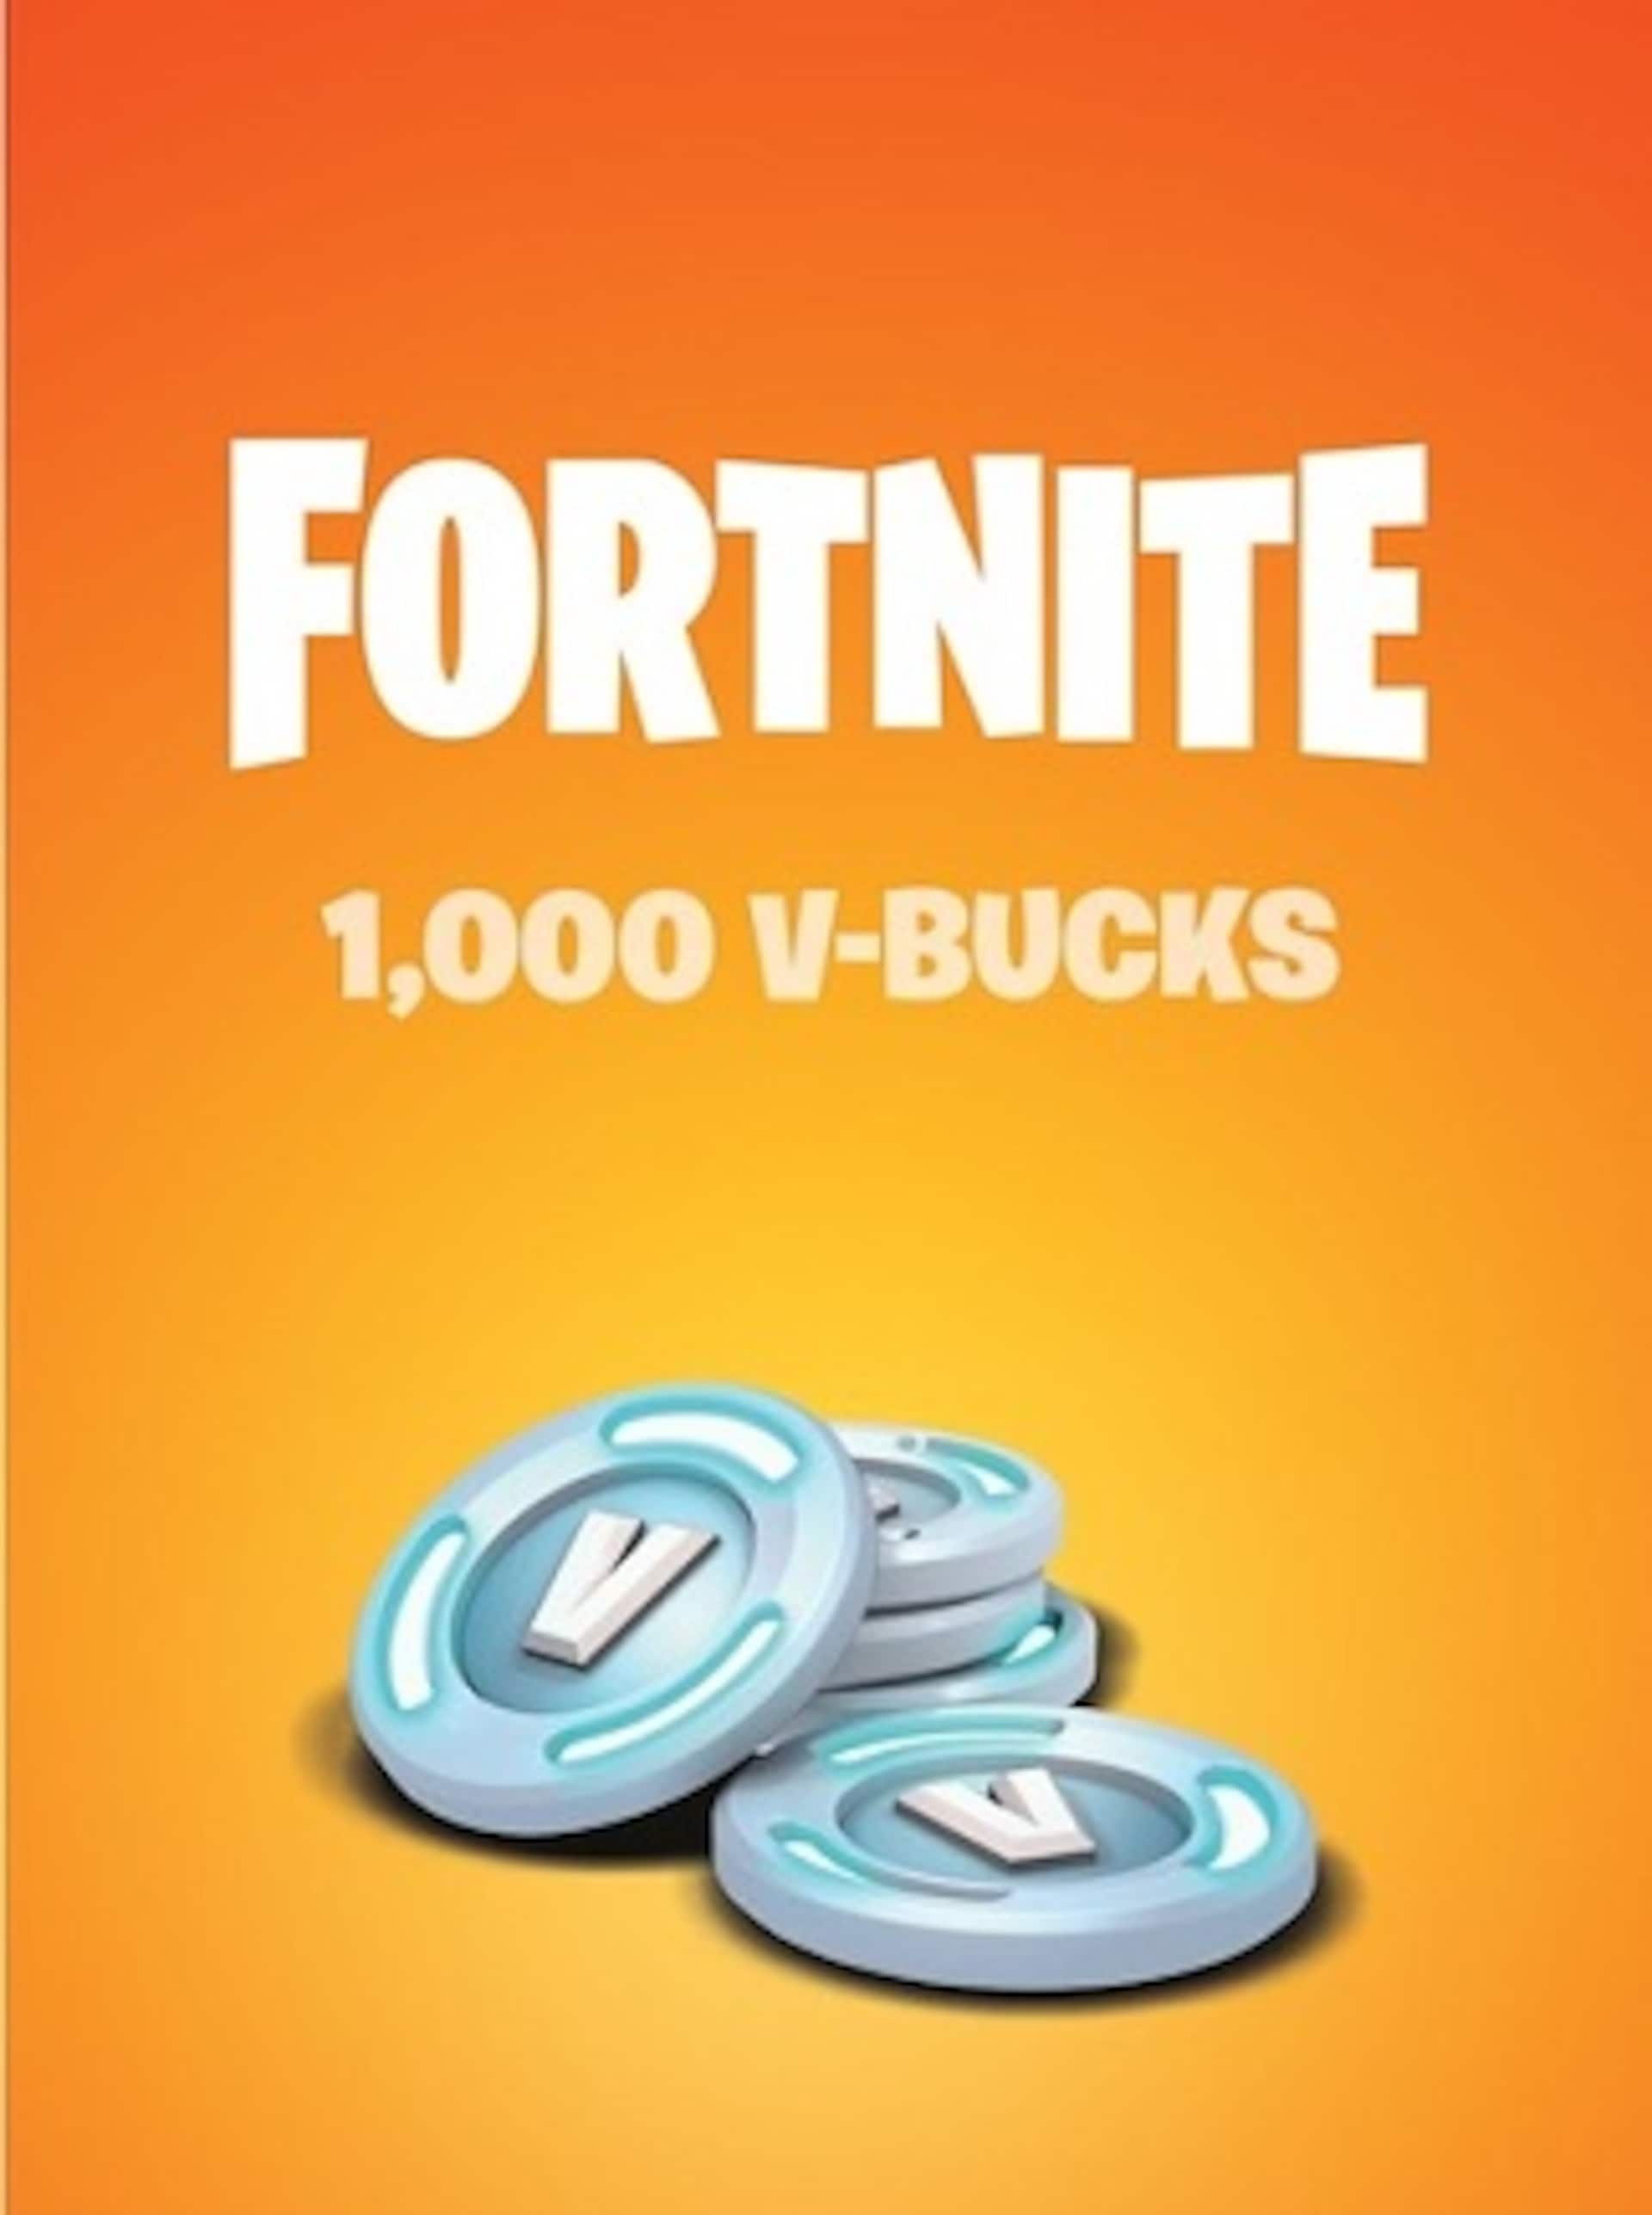 Fortnite Black Friday V-Bucks deal is not to be missed ahead of